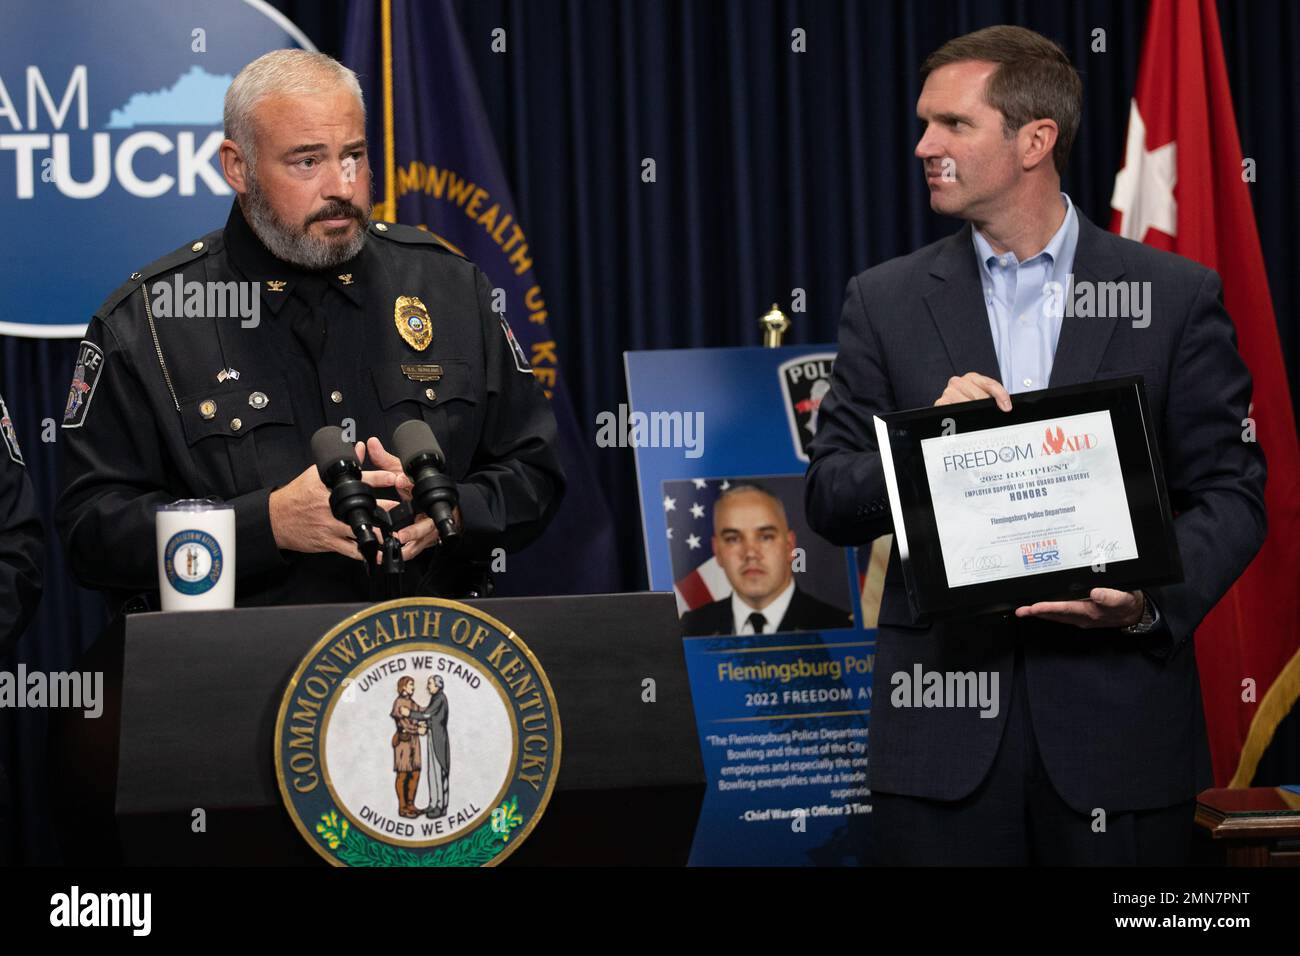 Flemingsburg Police Chief Brian Bowling (left) is presented the Secretary of Defense Freedom Award by Kentucky Governor Andy Beshear (right) at the Kentucky State Capitol in Frankfort, Ky. on Sept. 29, 2022. The Freedom Award is given to civilian employers of the Guard and Reserves by the ESGR for exceptional commitment to servicemembers' military careers. Stock Photo